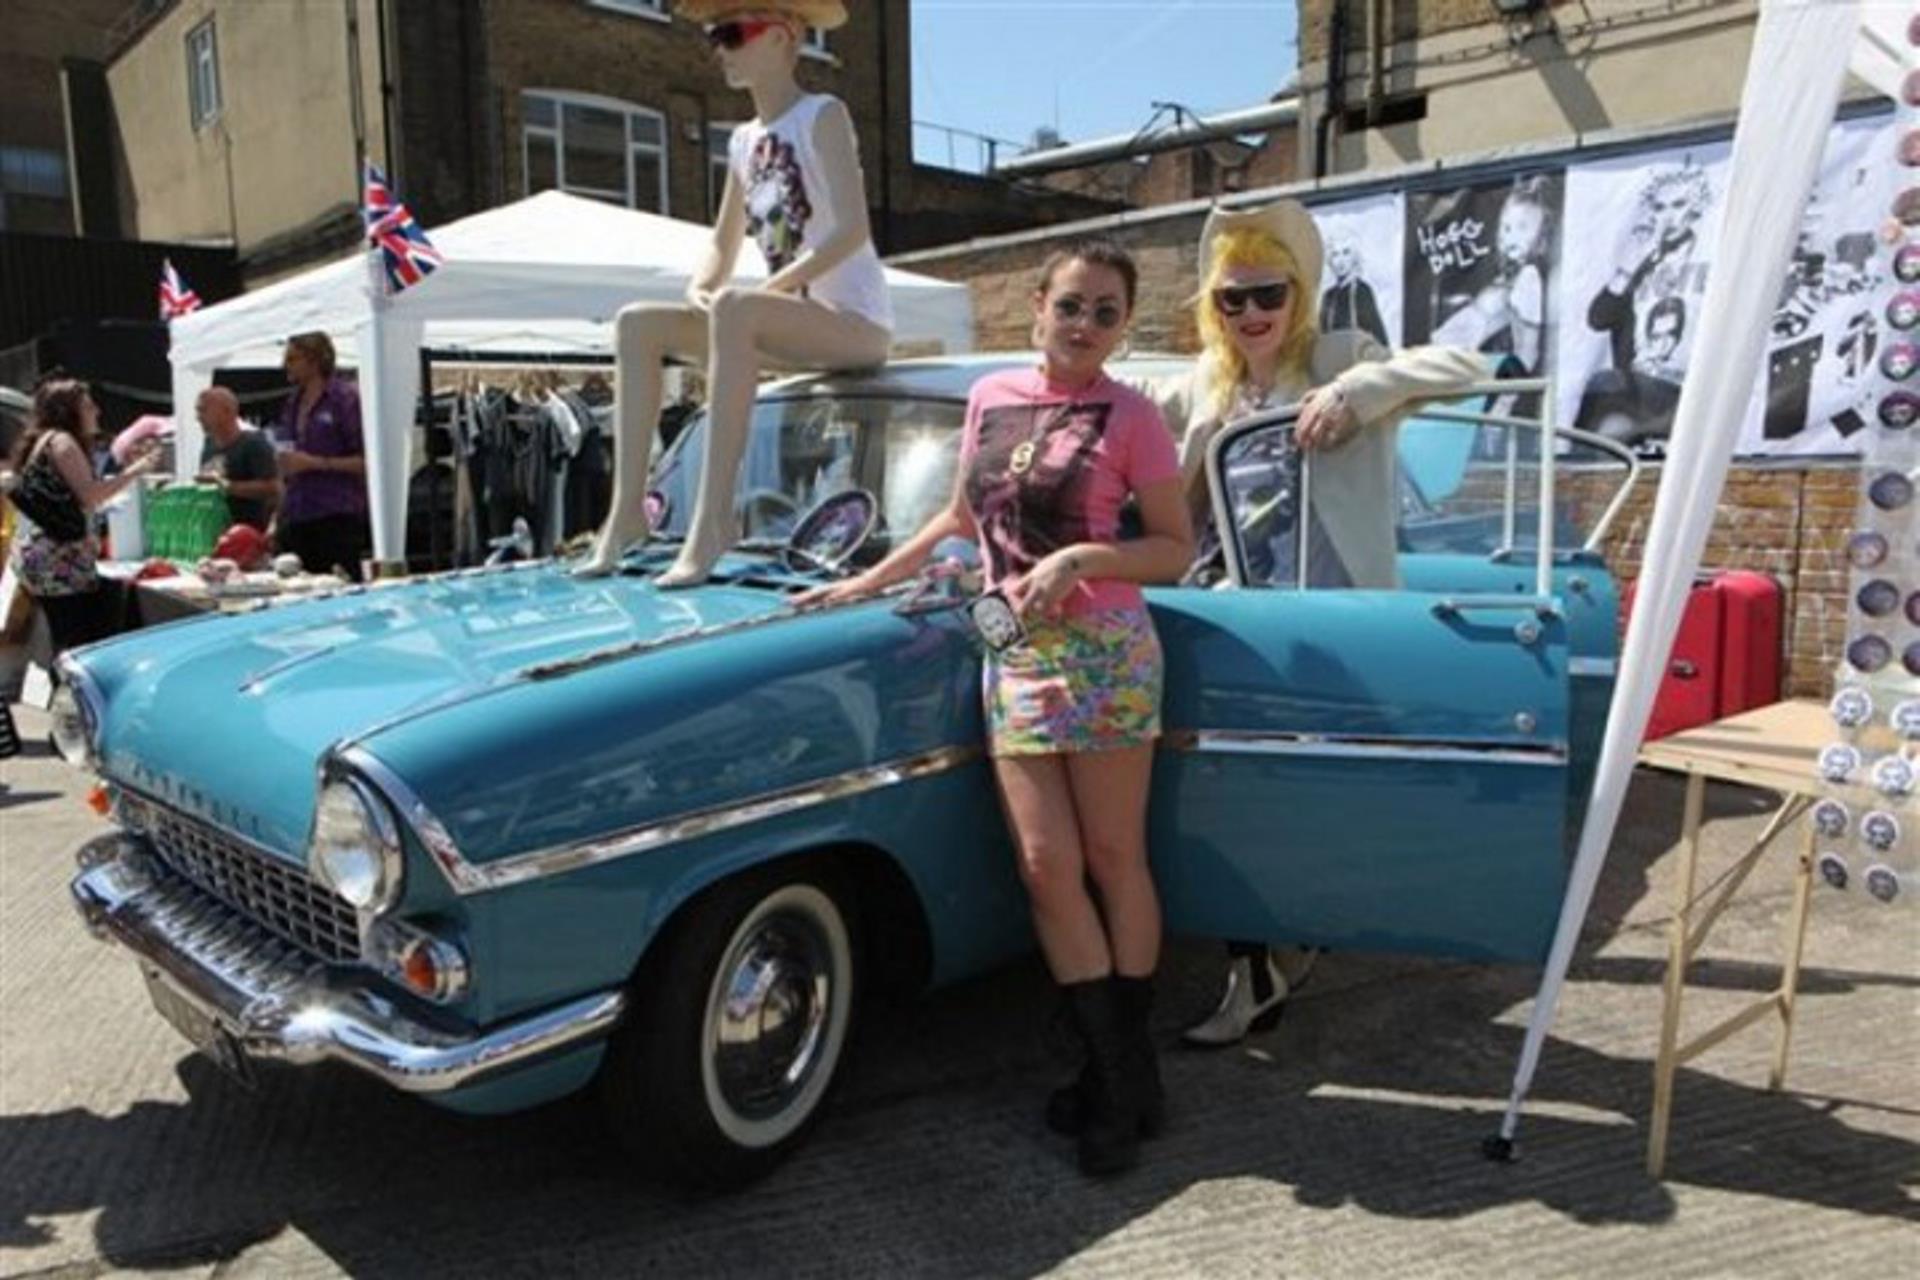 THE VAUXHALL ART CAR BOOT FAIR 2012 GETS BIGGER AND BETTER